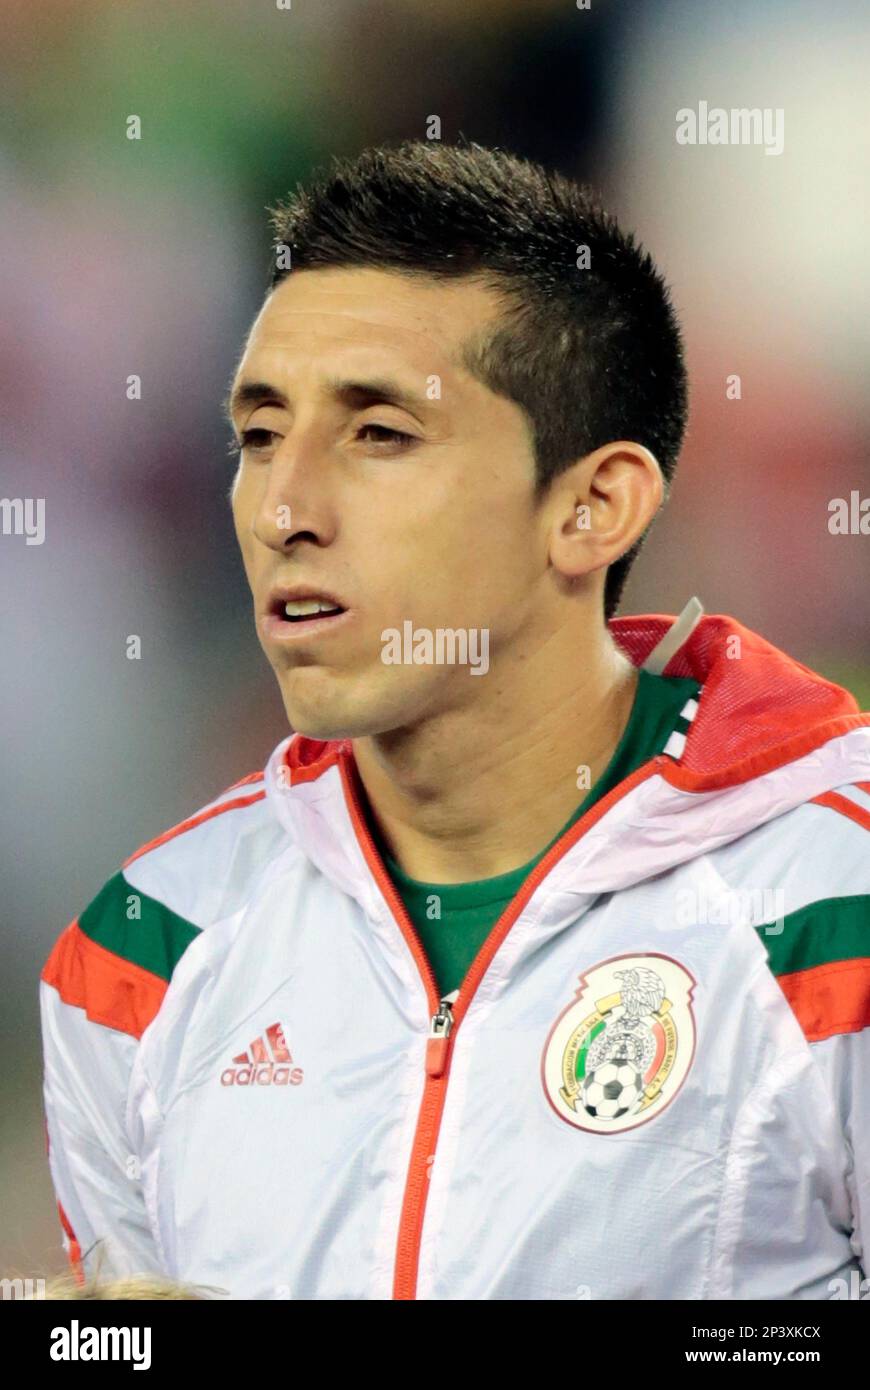 June 6, 2014: Mexico's Hector Herrera (6). The men's national team of Portugal defeated the men's national team of Mexico 1-0 in a final international friendly before the 2014 FIFA World Cup at Gillette Stadium in Foxborough, Massachusetts. (Icon Sportswire via AP Images) Stock Photo